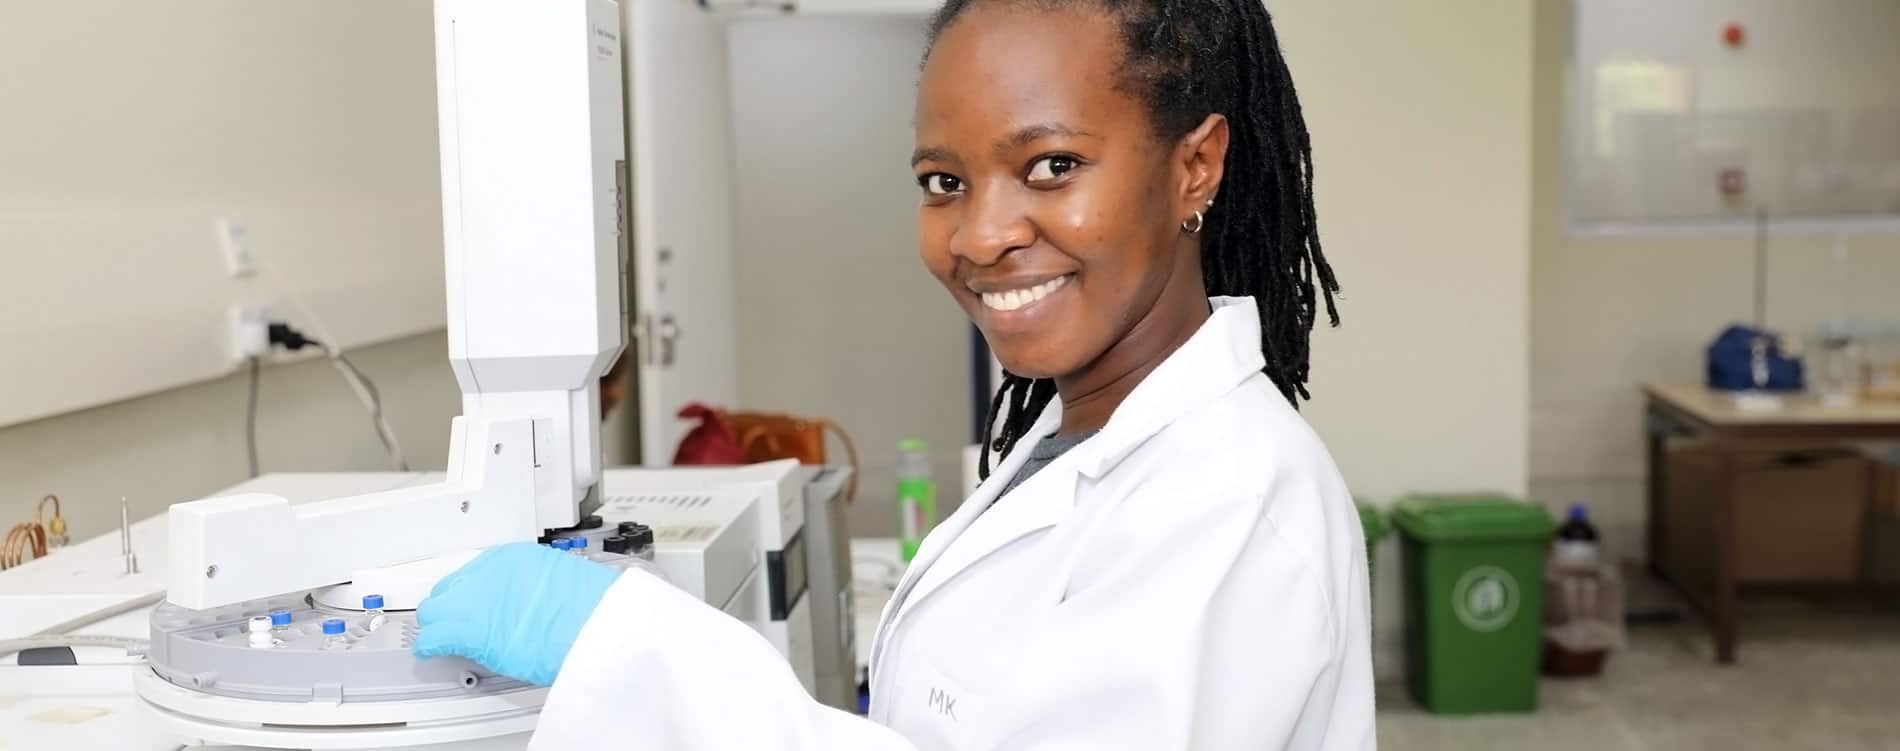 Msc student, Juliet Ochola, researching on “suicide hatching” as an effective ways to control nematode, looking at the pest with a microscope in the laboratory.